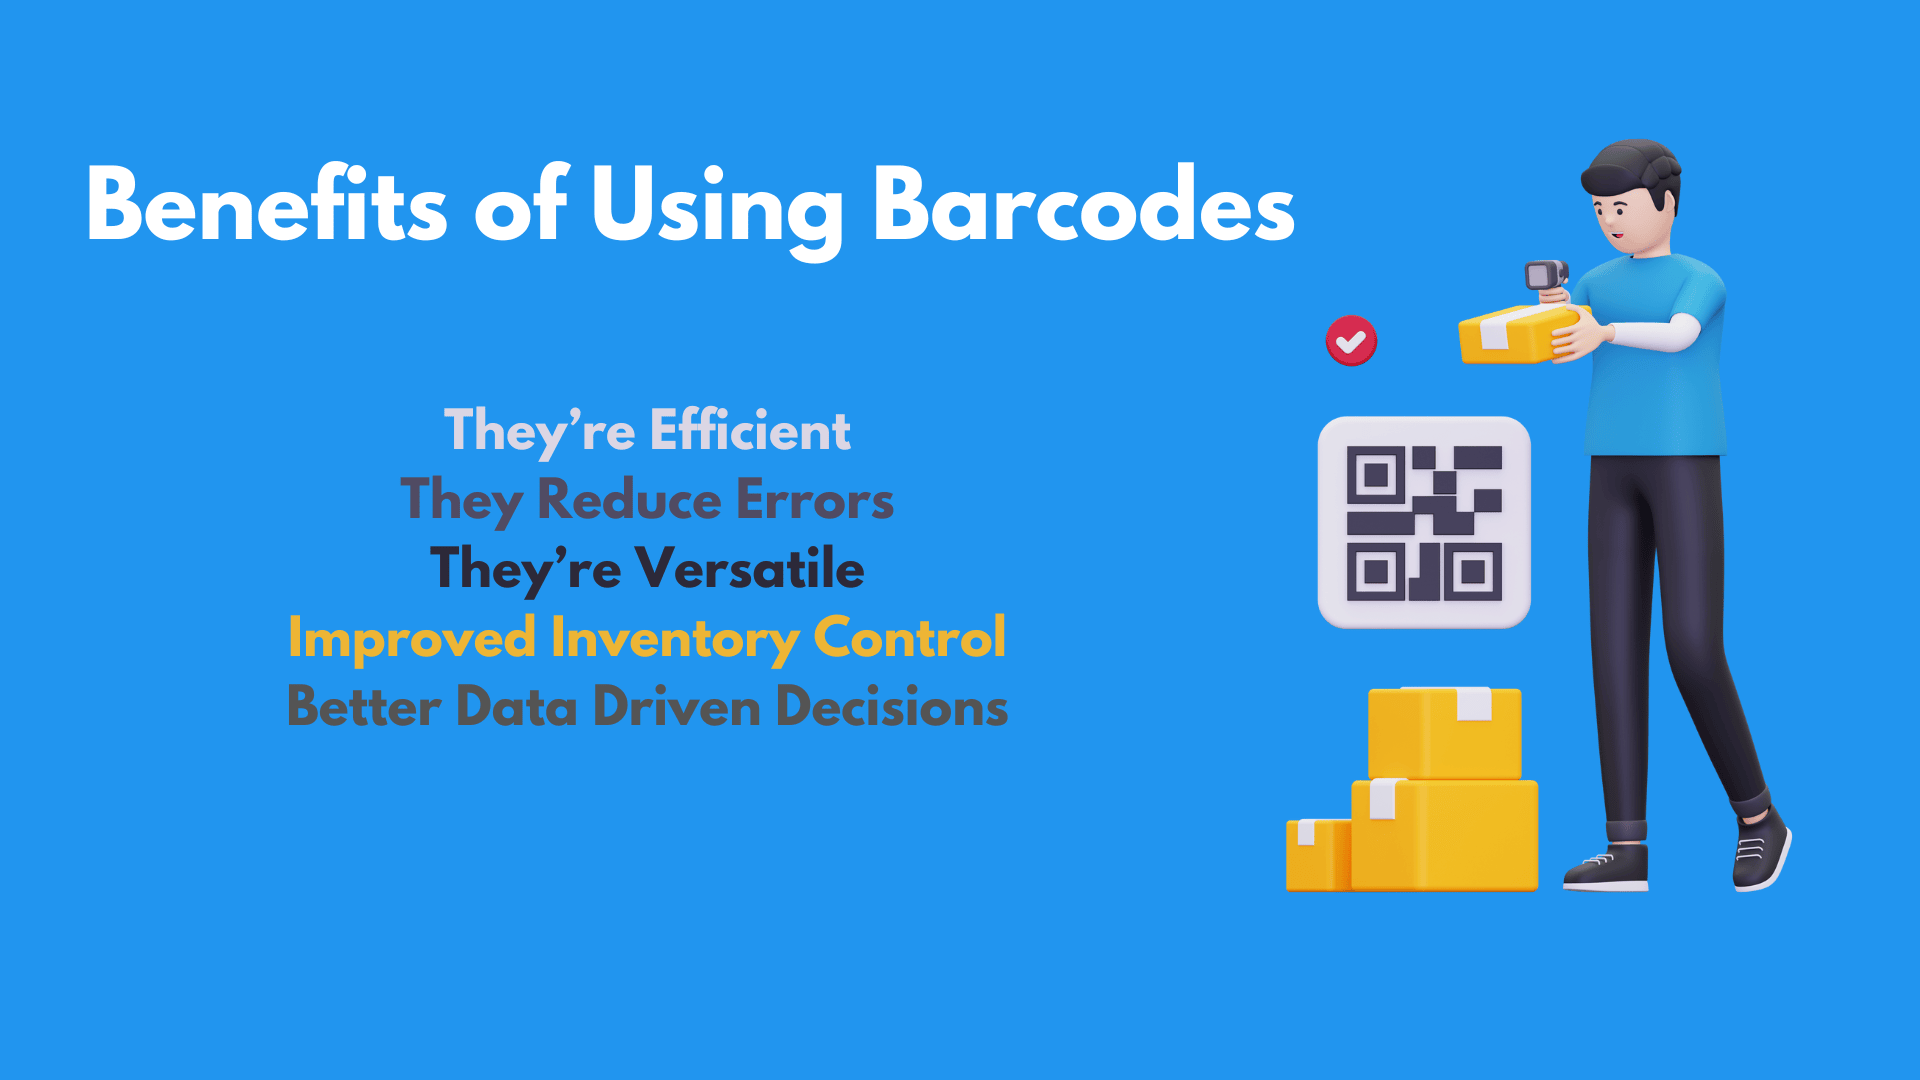 Benefits of Using Barcodes